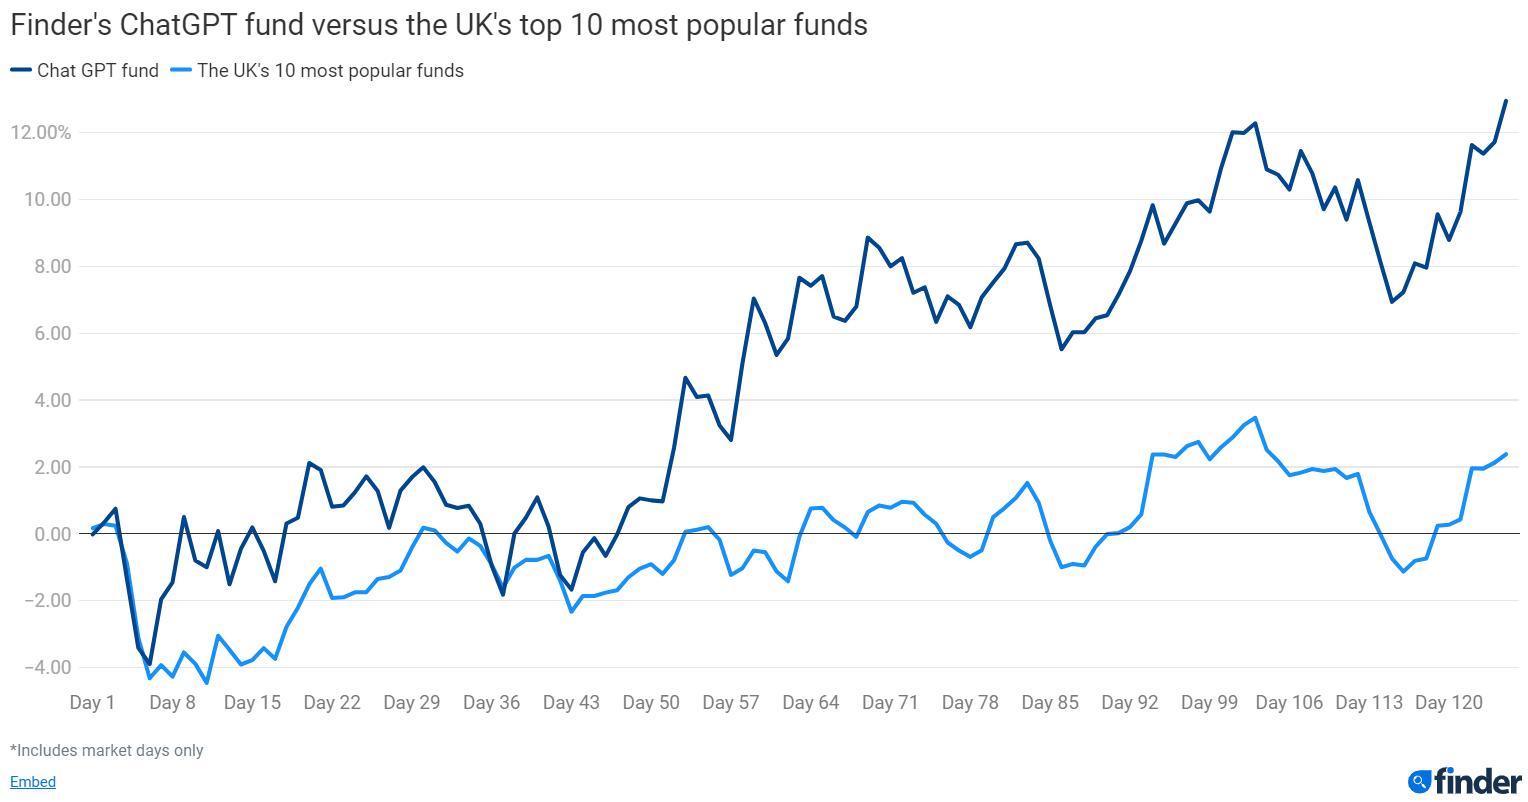 A graph showing the change in a basket of 38 stocks picked by ChatGPT compared to the UK's top 10 popular funds